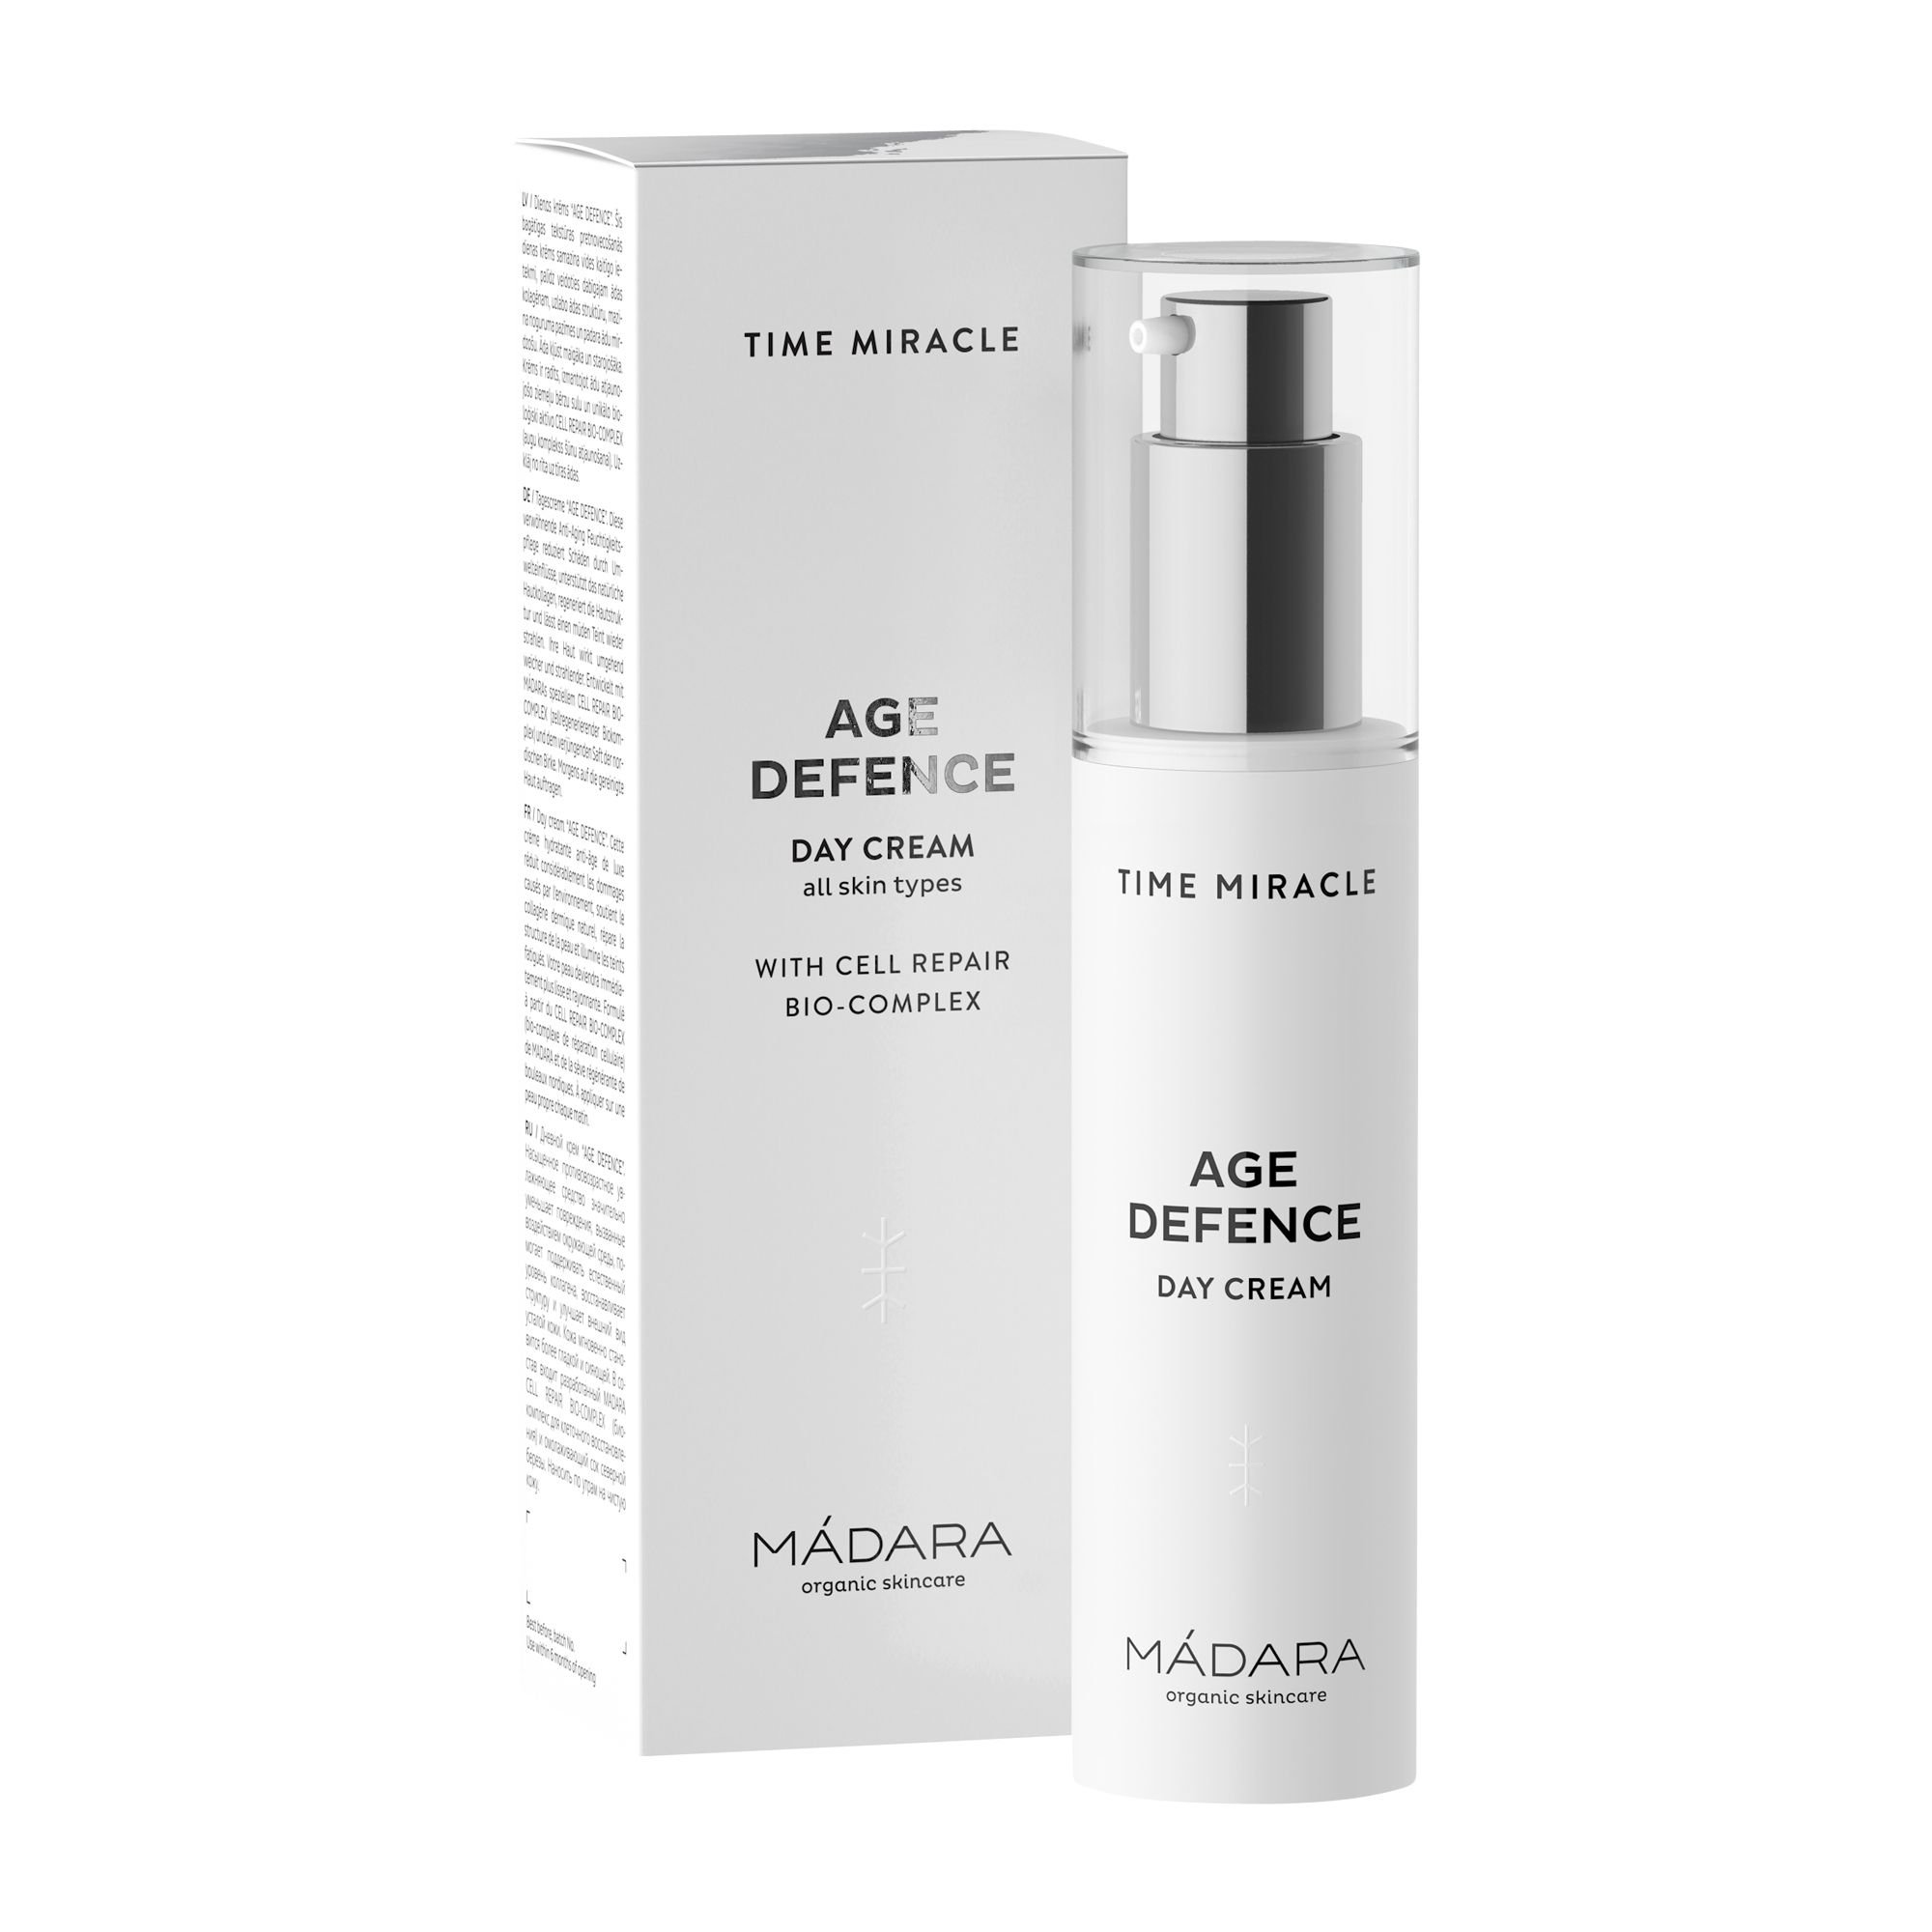 Mádara - Time Miracle Age Defence Day Cream 50 ml